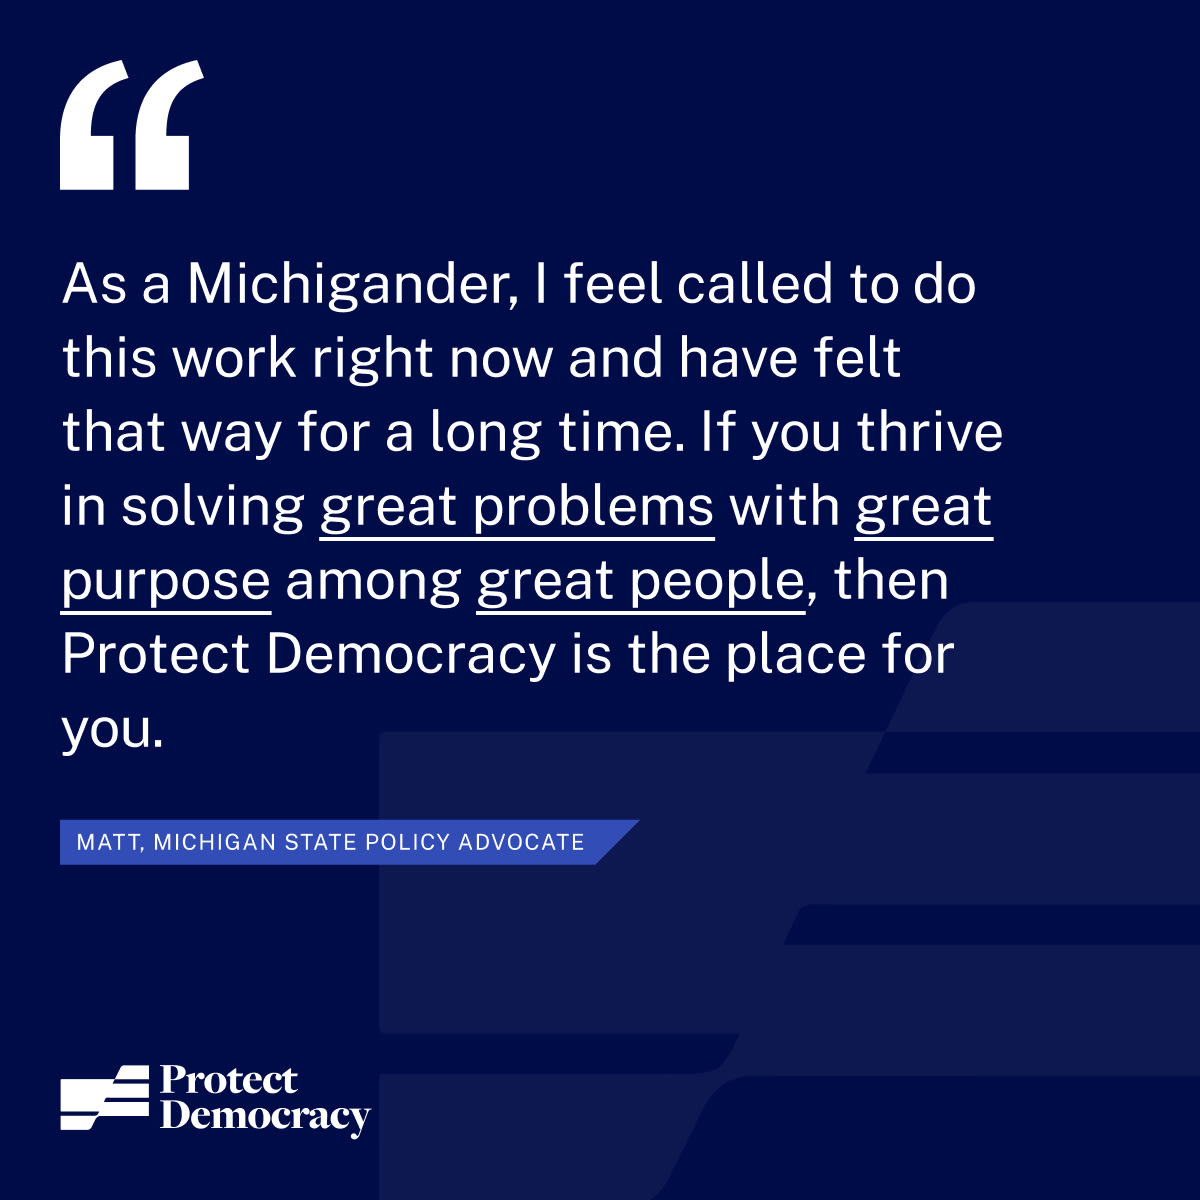 “As a Michigander, I feel called to do this work right now and have felt that way for a long time. If you thrive in solving great problems with great purpose among great people, then Protect Democracy is the place for you.”  – Matt, State Policy Advocate